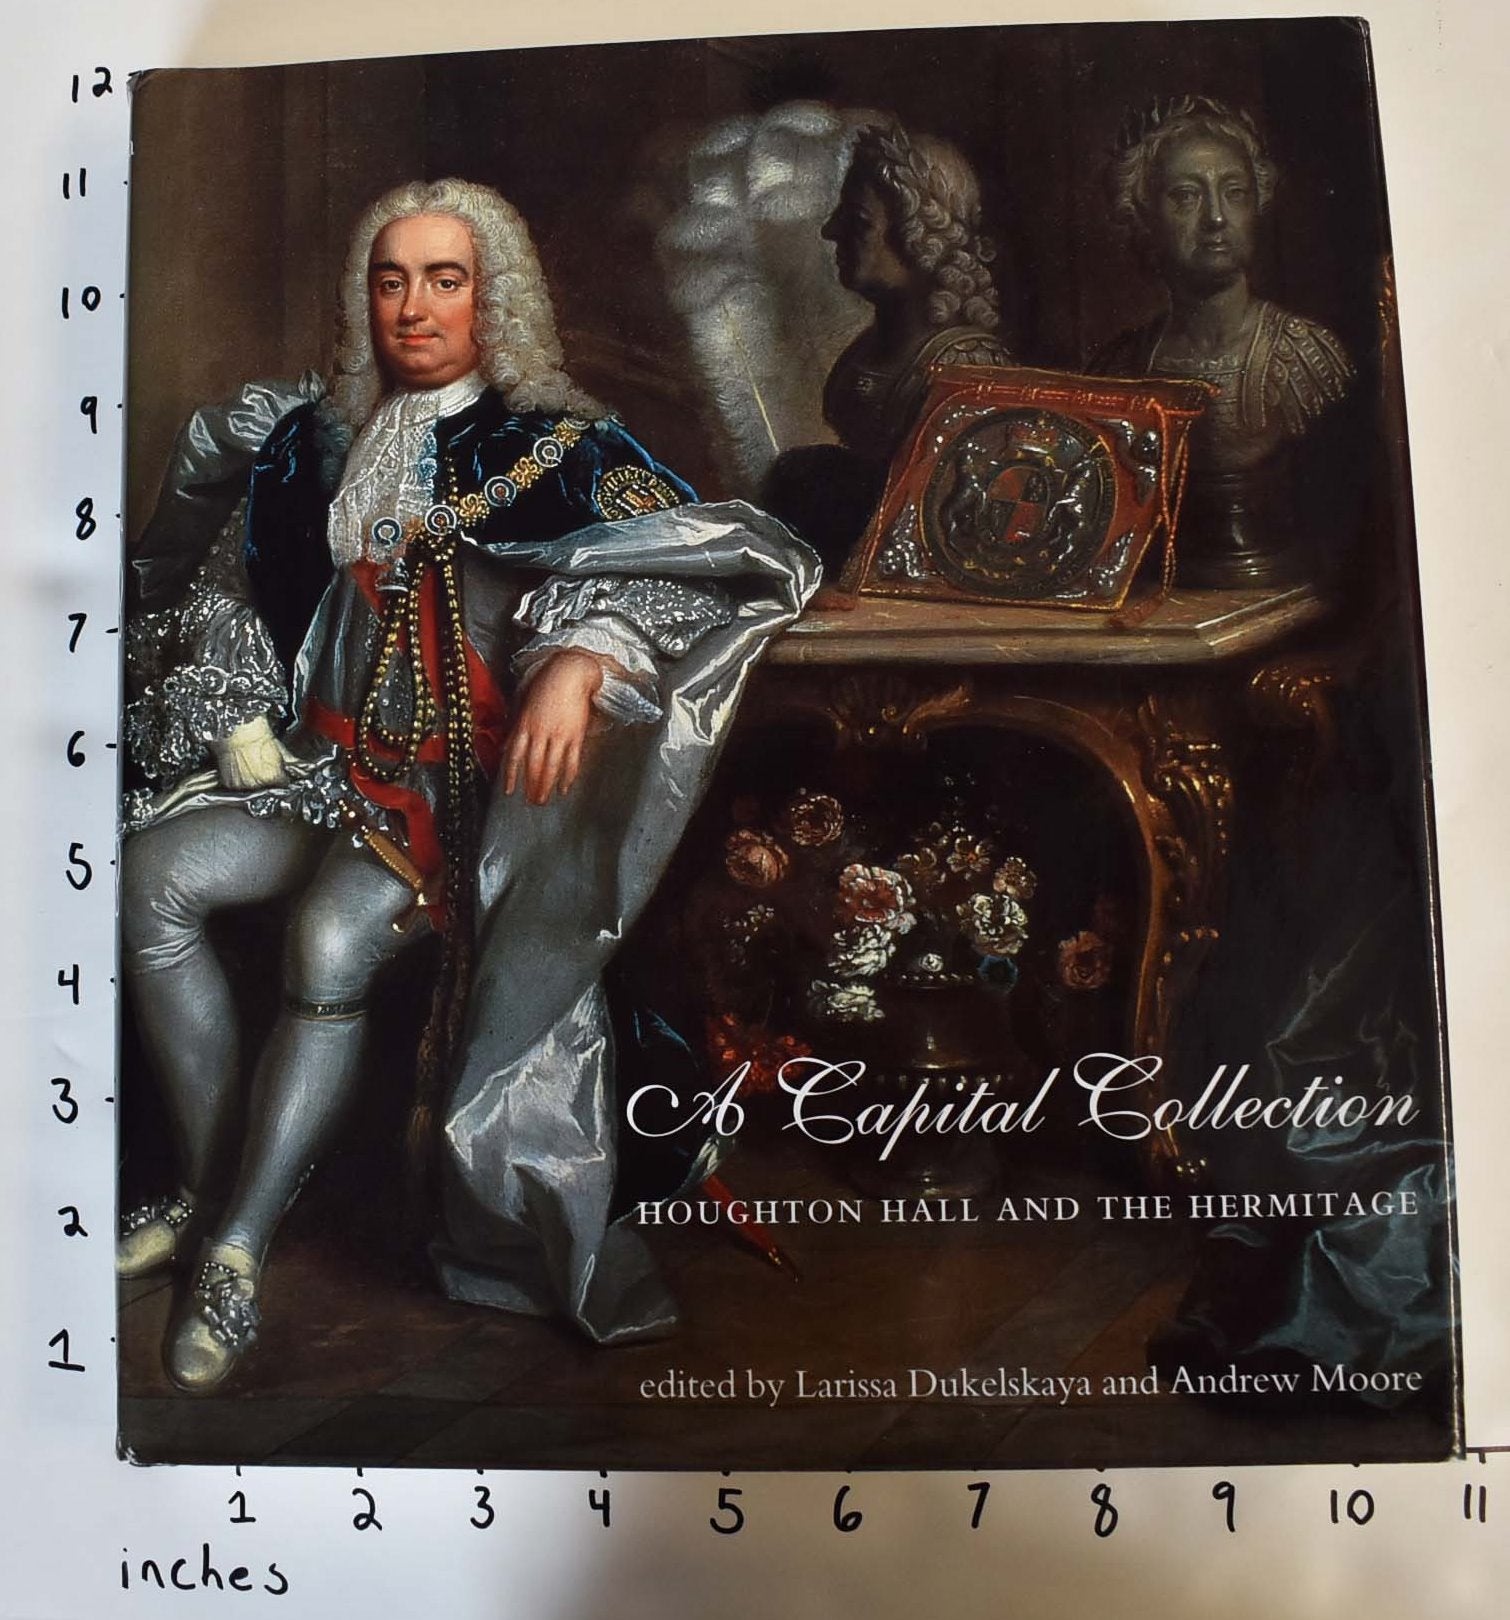 Dukelskaya, Larissa and Andrew Moore (editors) - A Capital Collection: Houghton Hall and the Hermitage -- with a Modern Edition of Aedes Walpolianae, Horace Walpole's Catalogue of Sir Robert Walpole's Collection